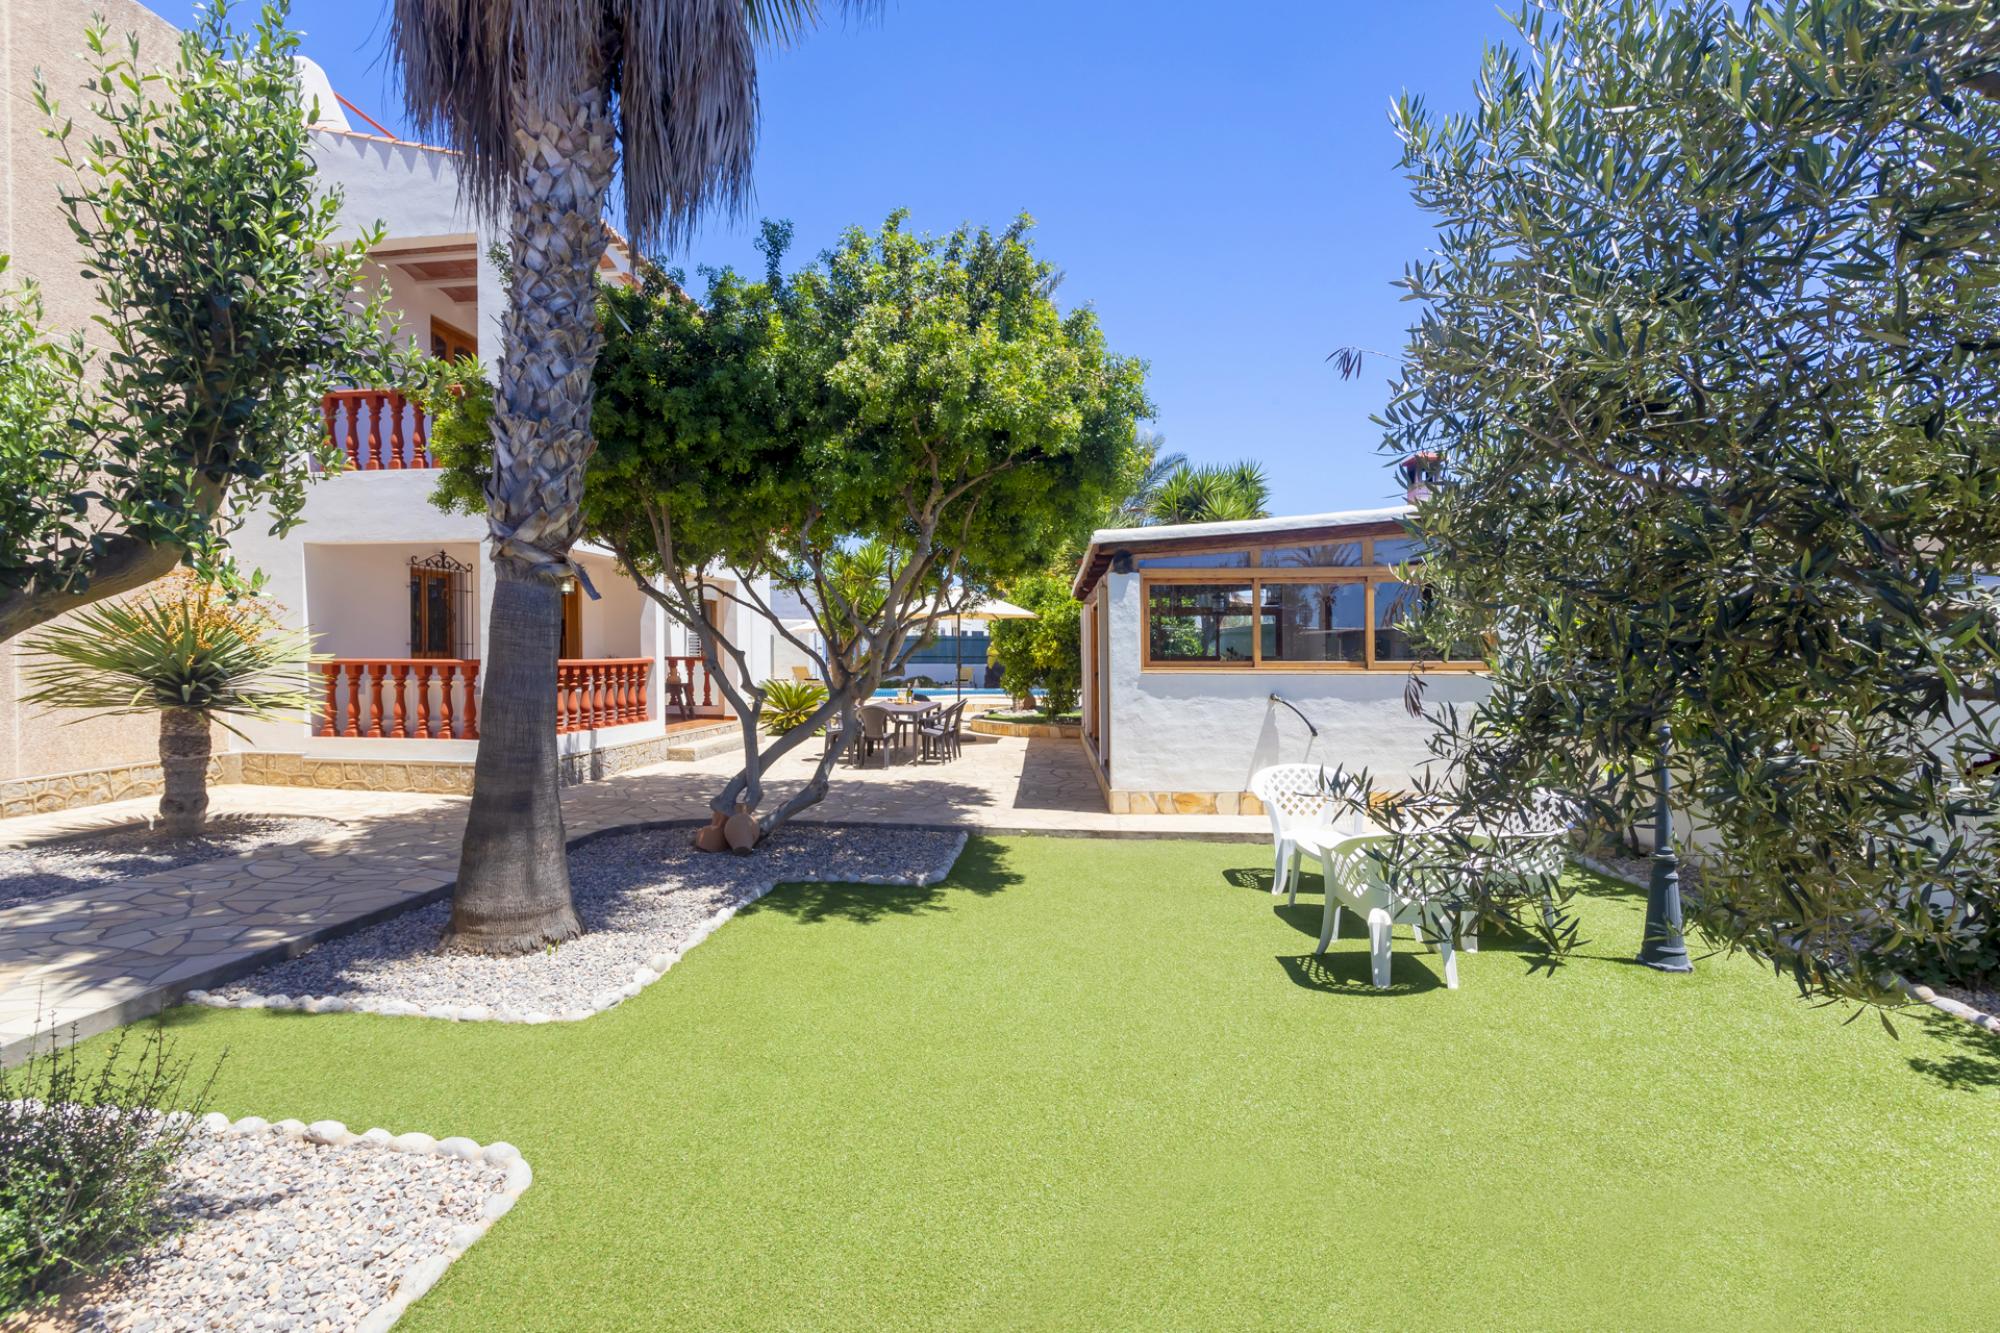 Property Image 2 - Classic Ibizan Spanish Style Villa Perfectly Located Near Top Attractions